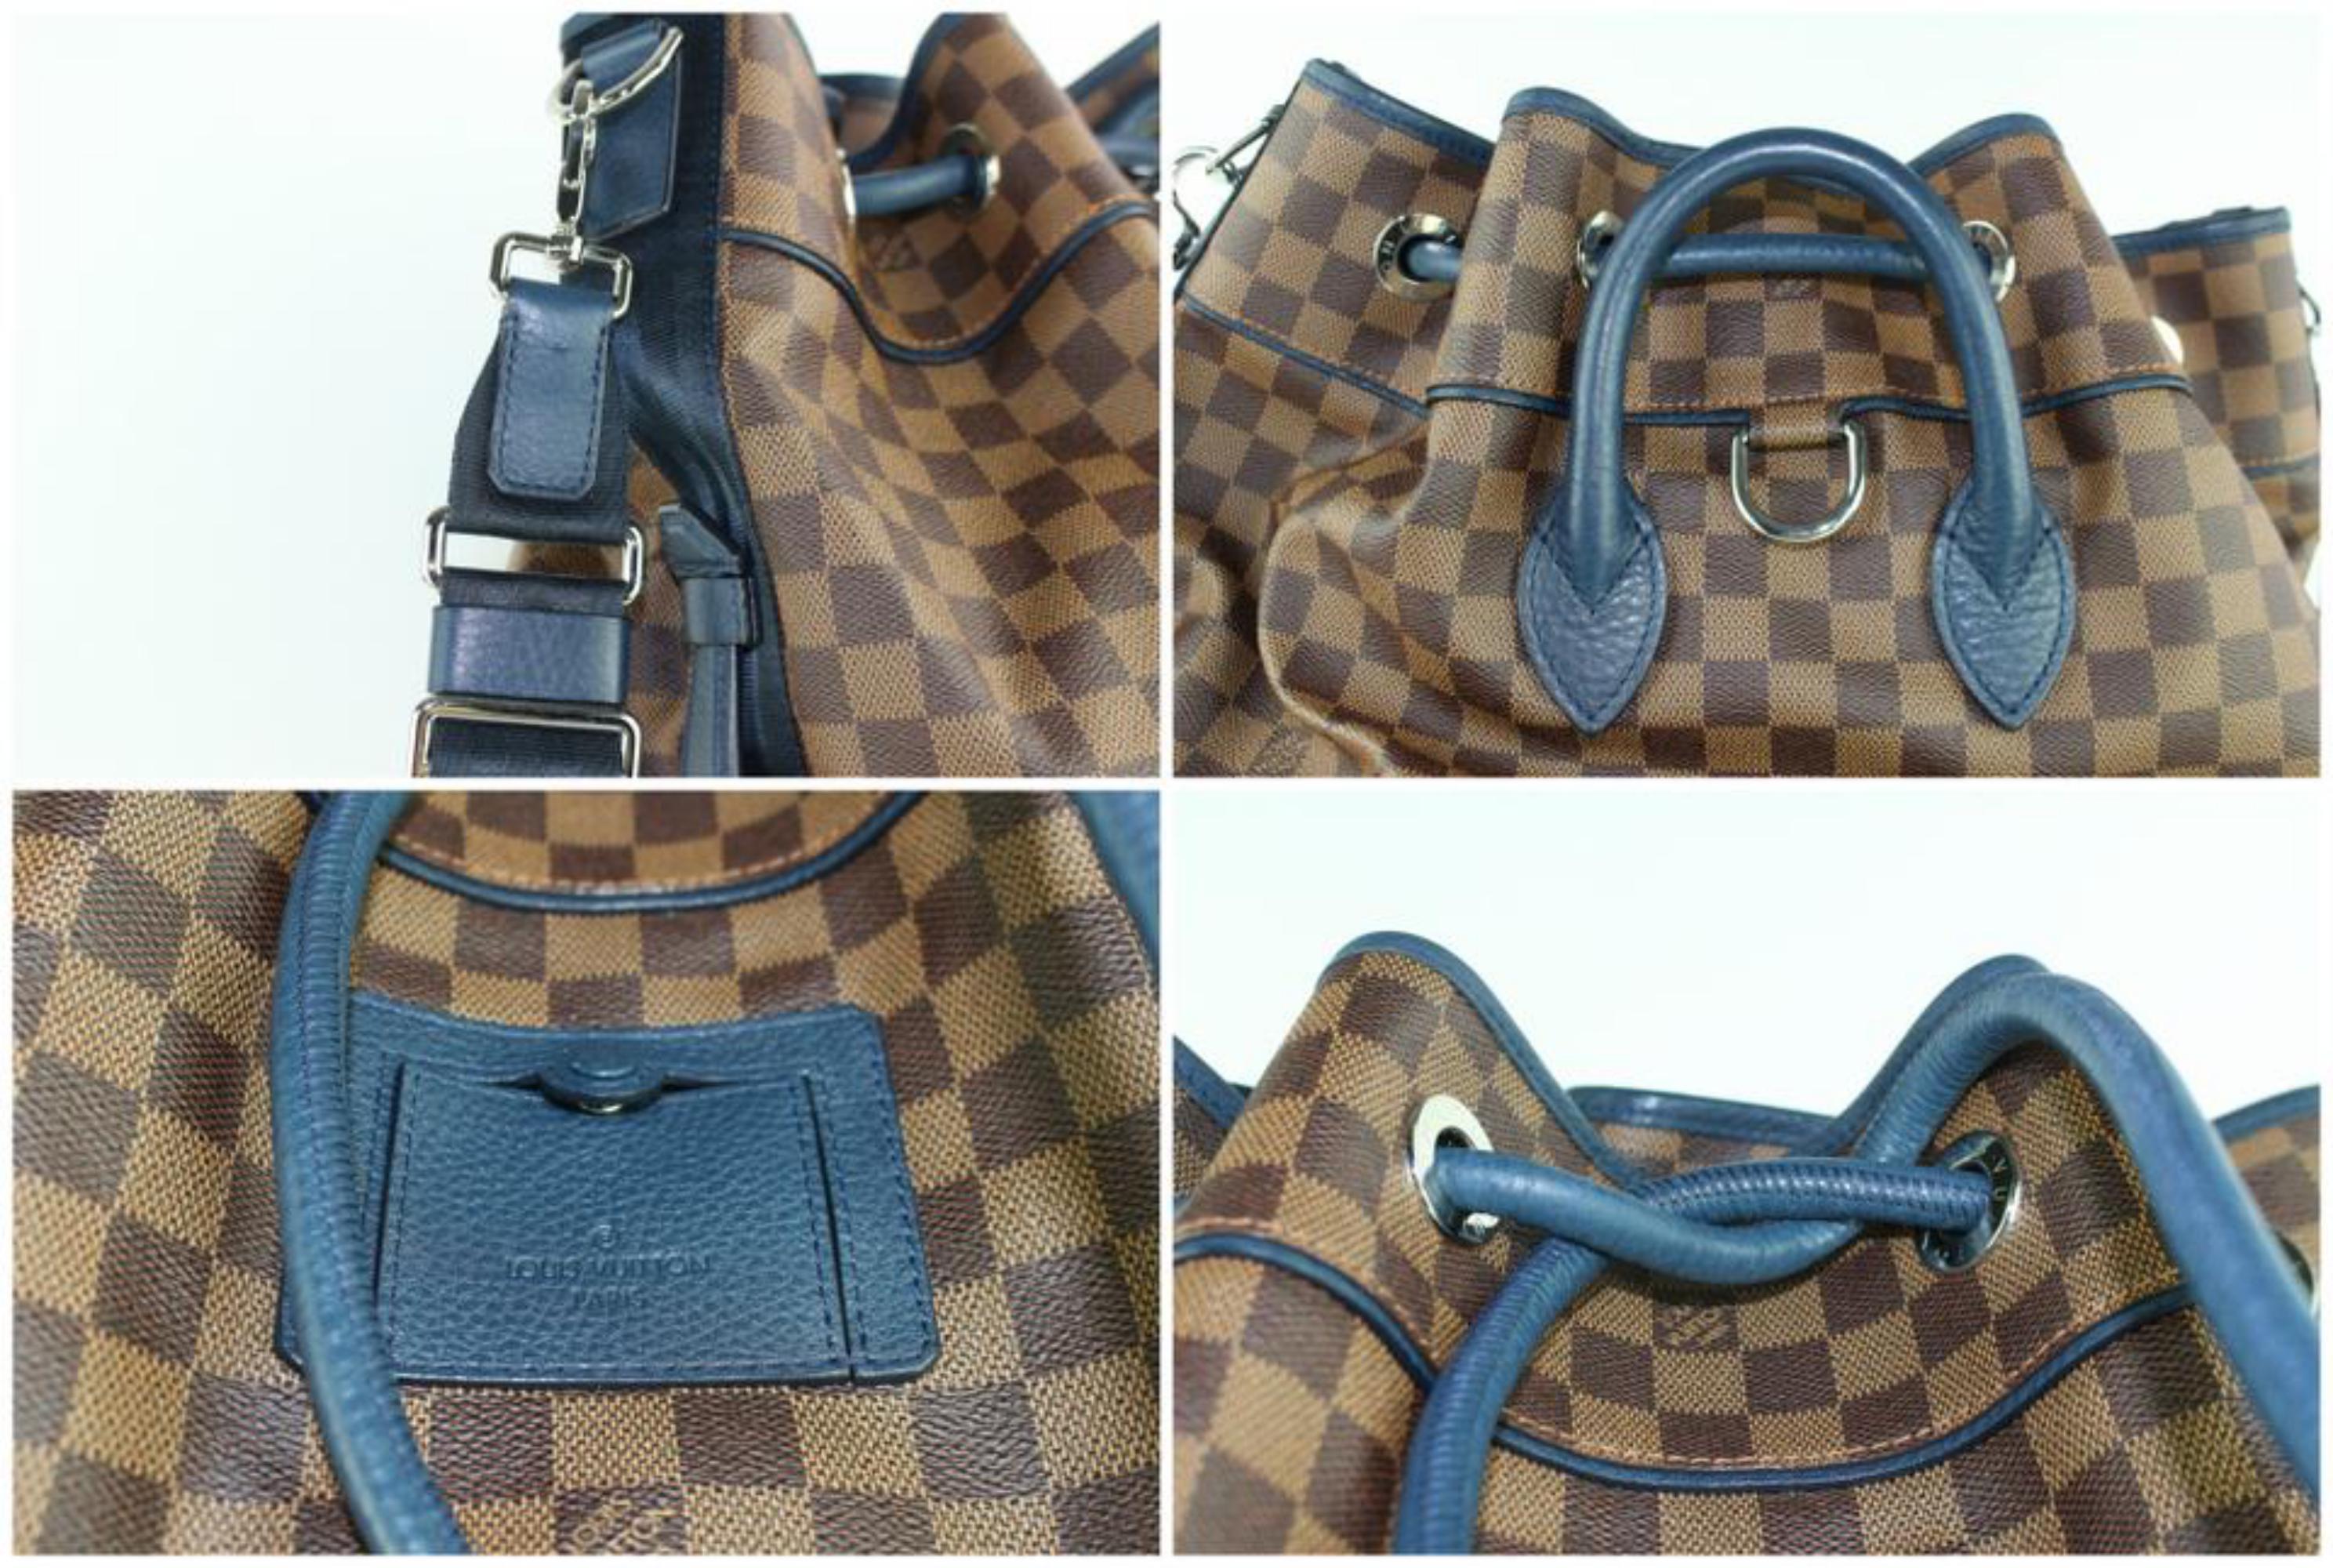 Louis Vuitton Duffle Ultra Rare  Ebene Blue Sac Marin 17lz0129 Brown Backpack  In Excellent Condition For Sale In Forest Hills, NY